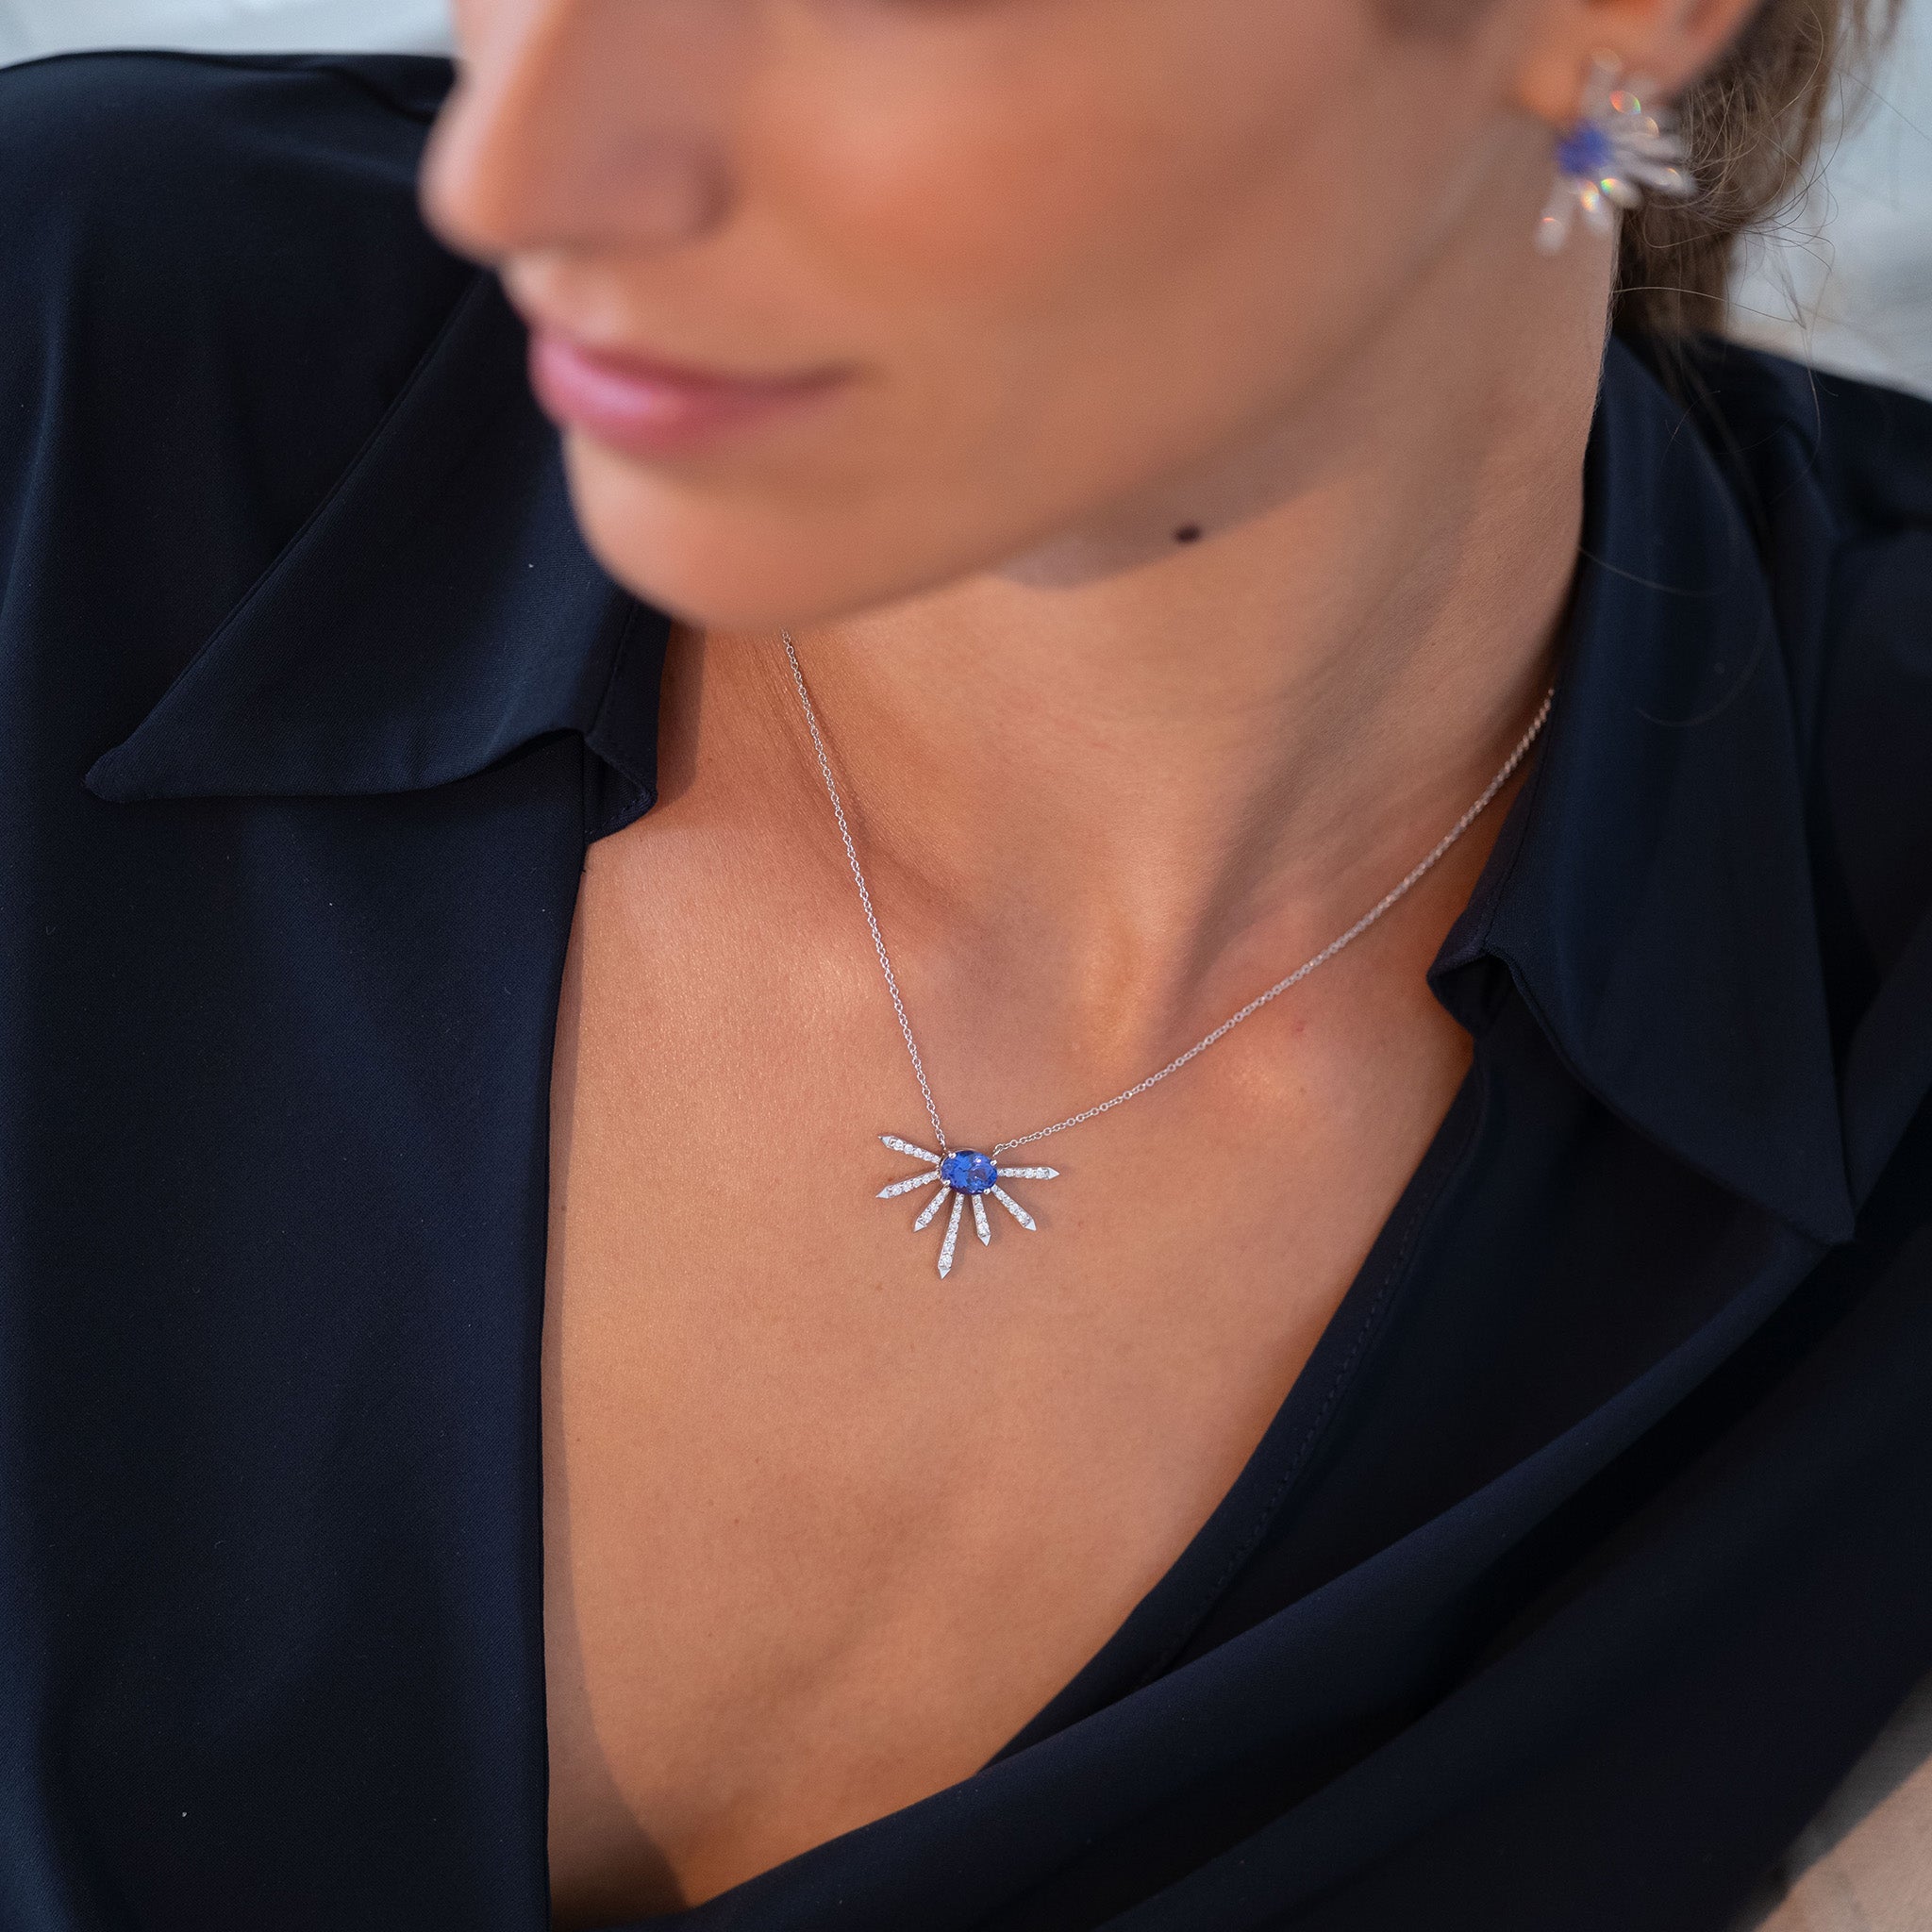 A breathtaking pendant featuring a stunning Tanzanite center stone surrounded by dazzling diamonds displayed on model. 